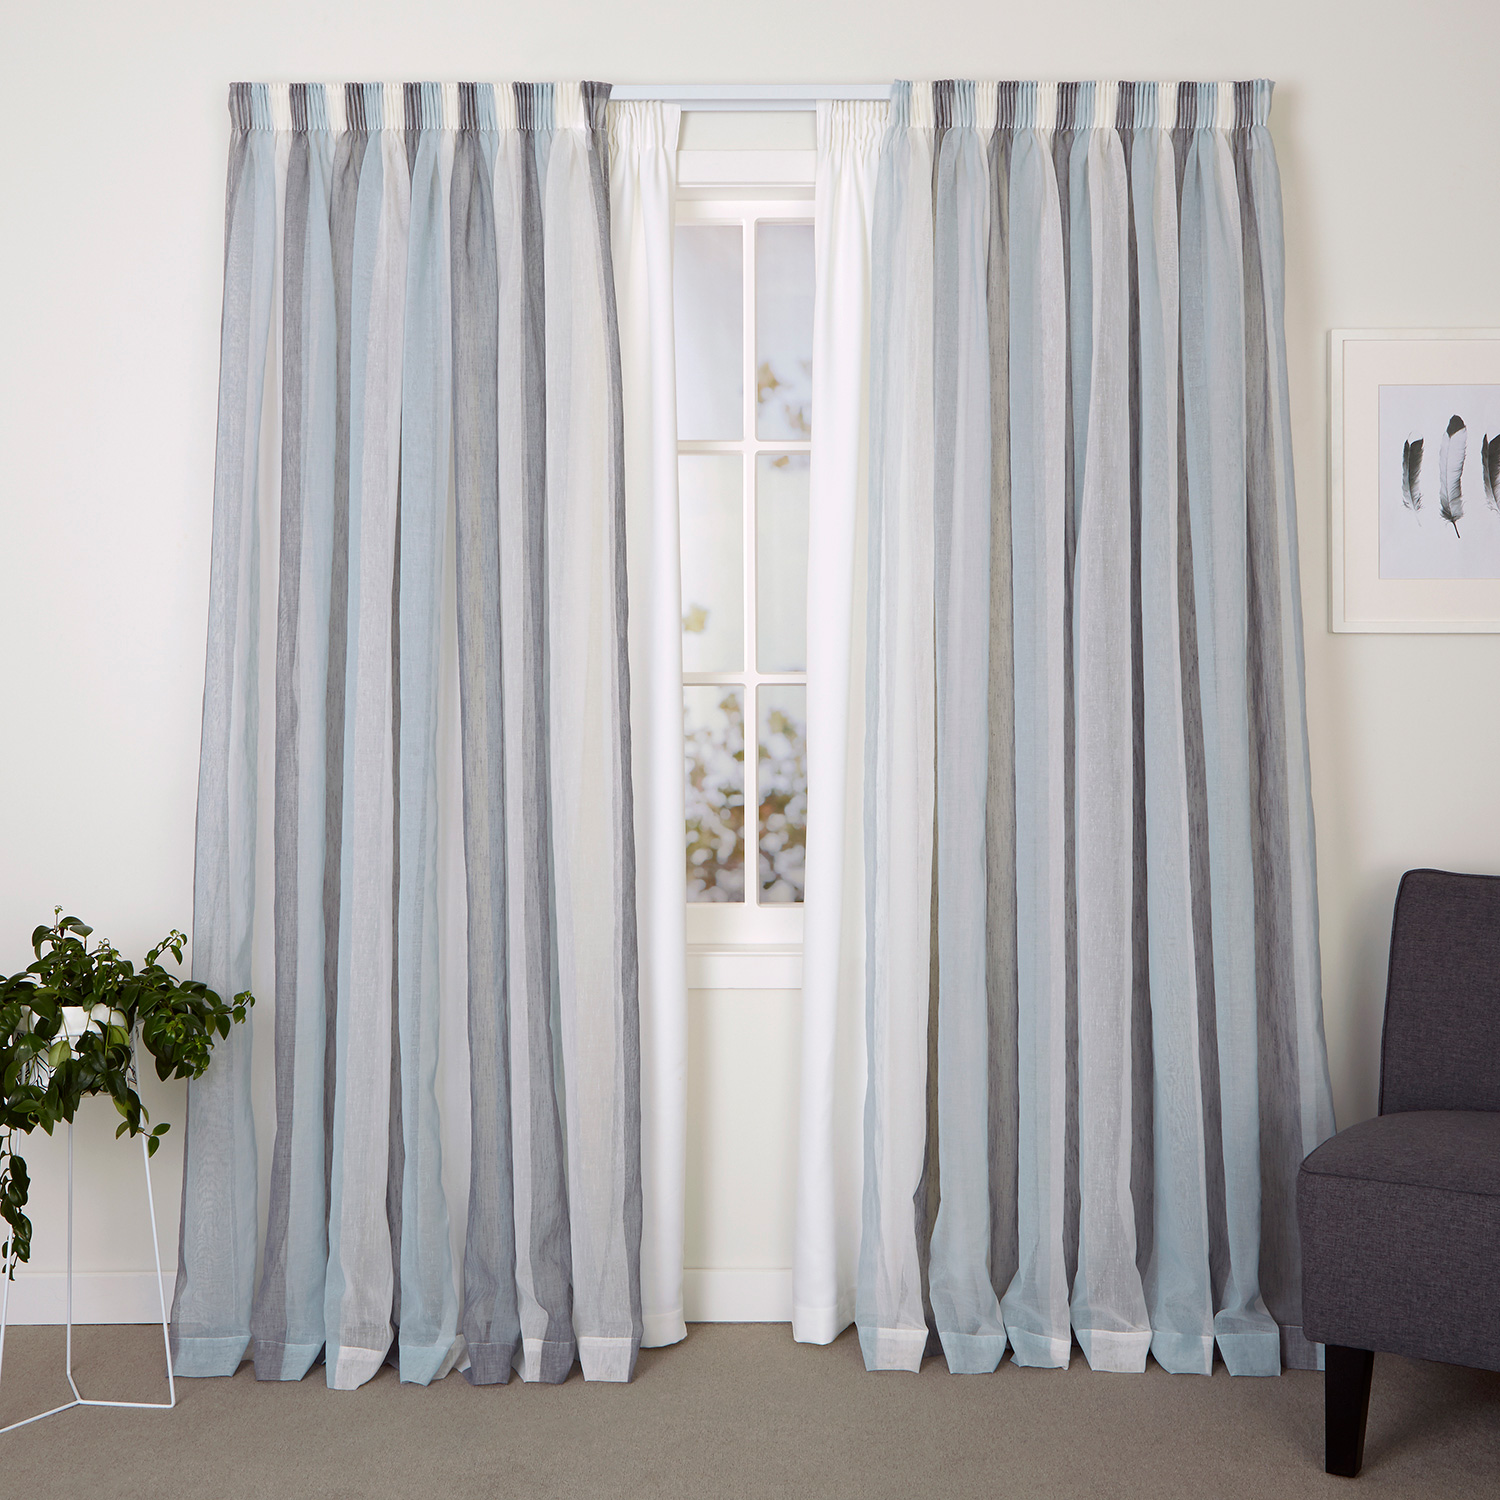 How to line ready made eyelet curtains